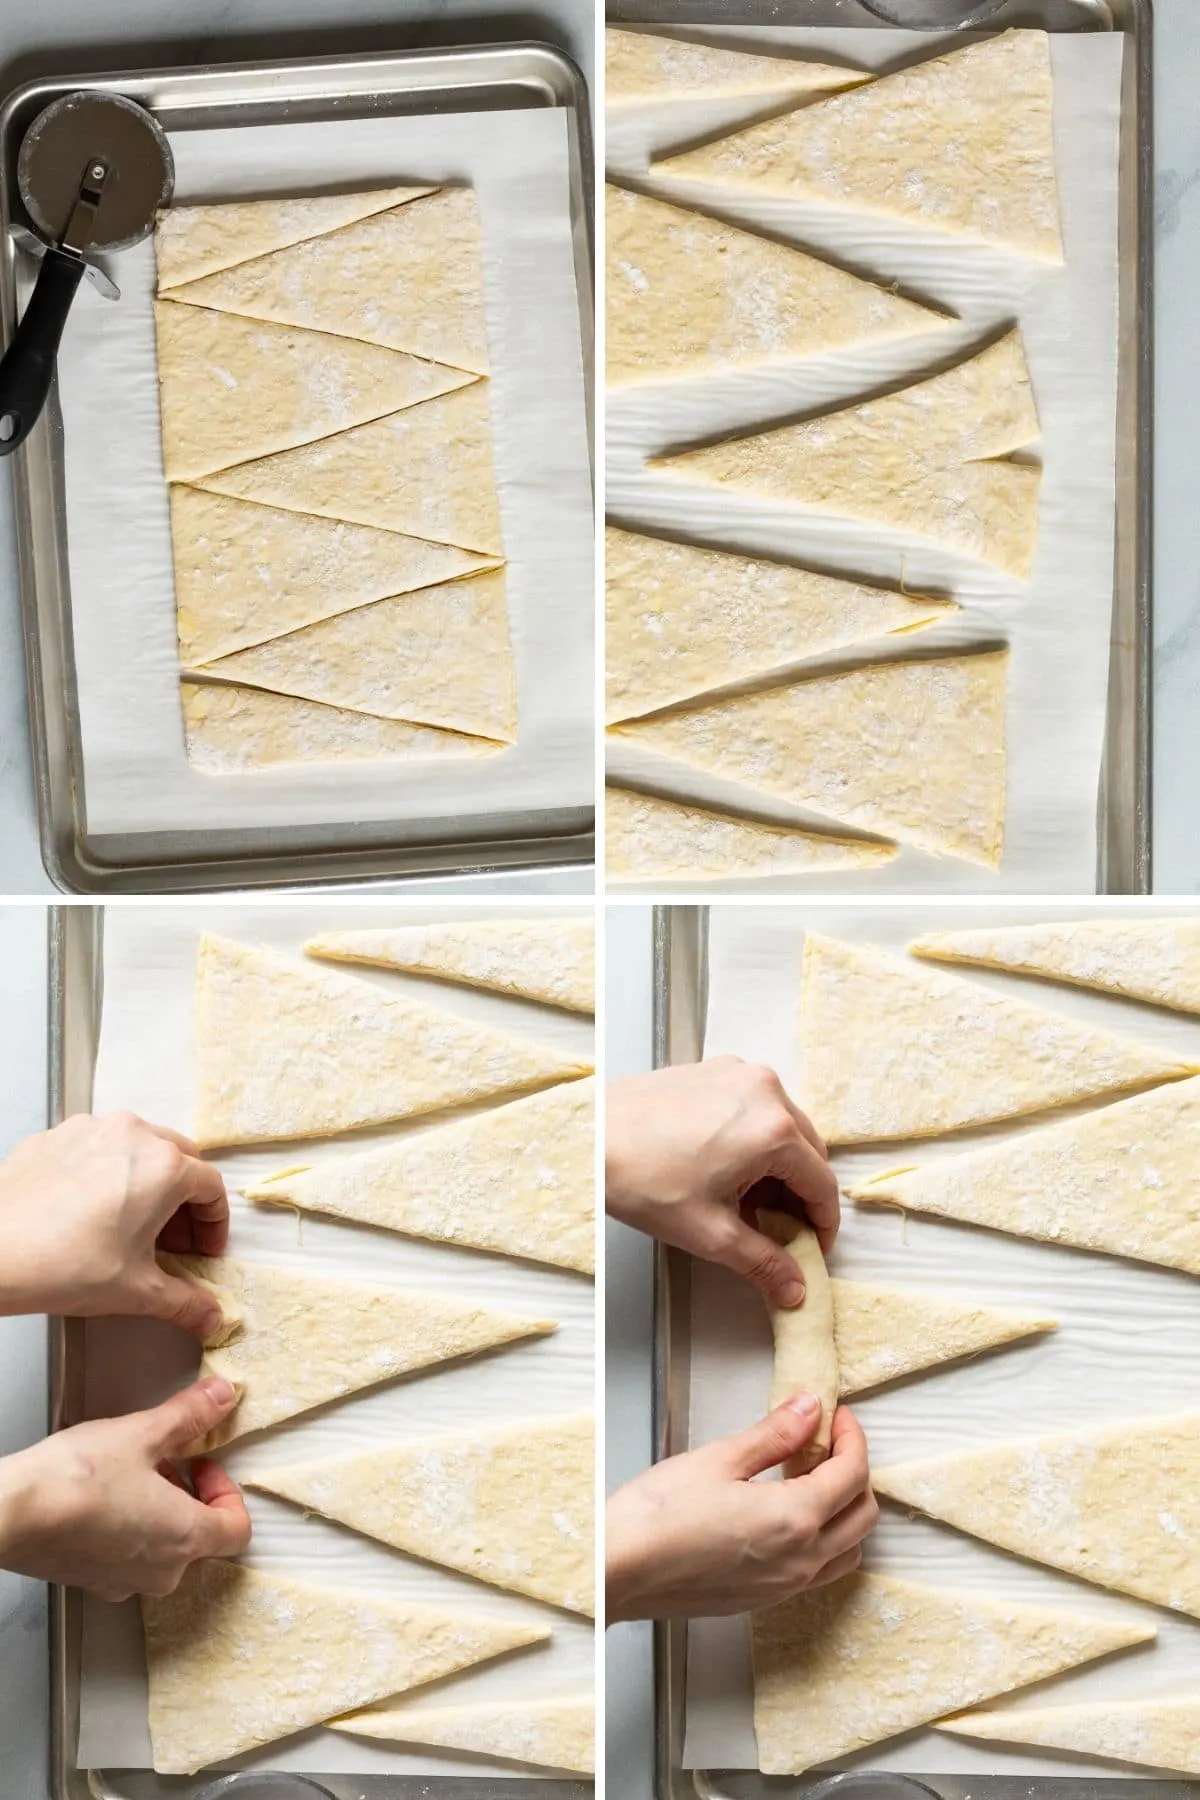 Step by step how to shape croissants